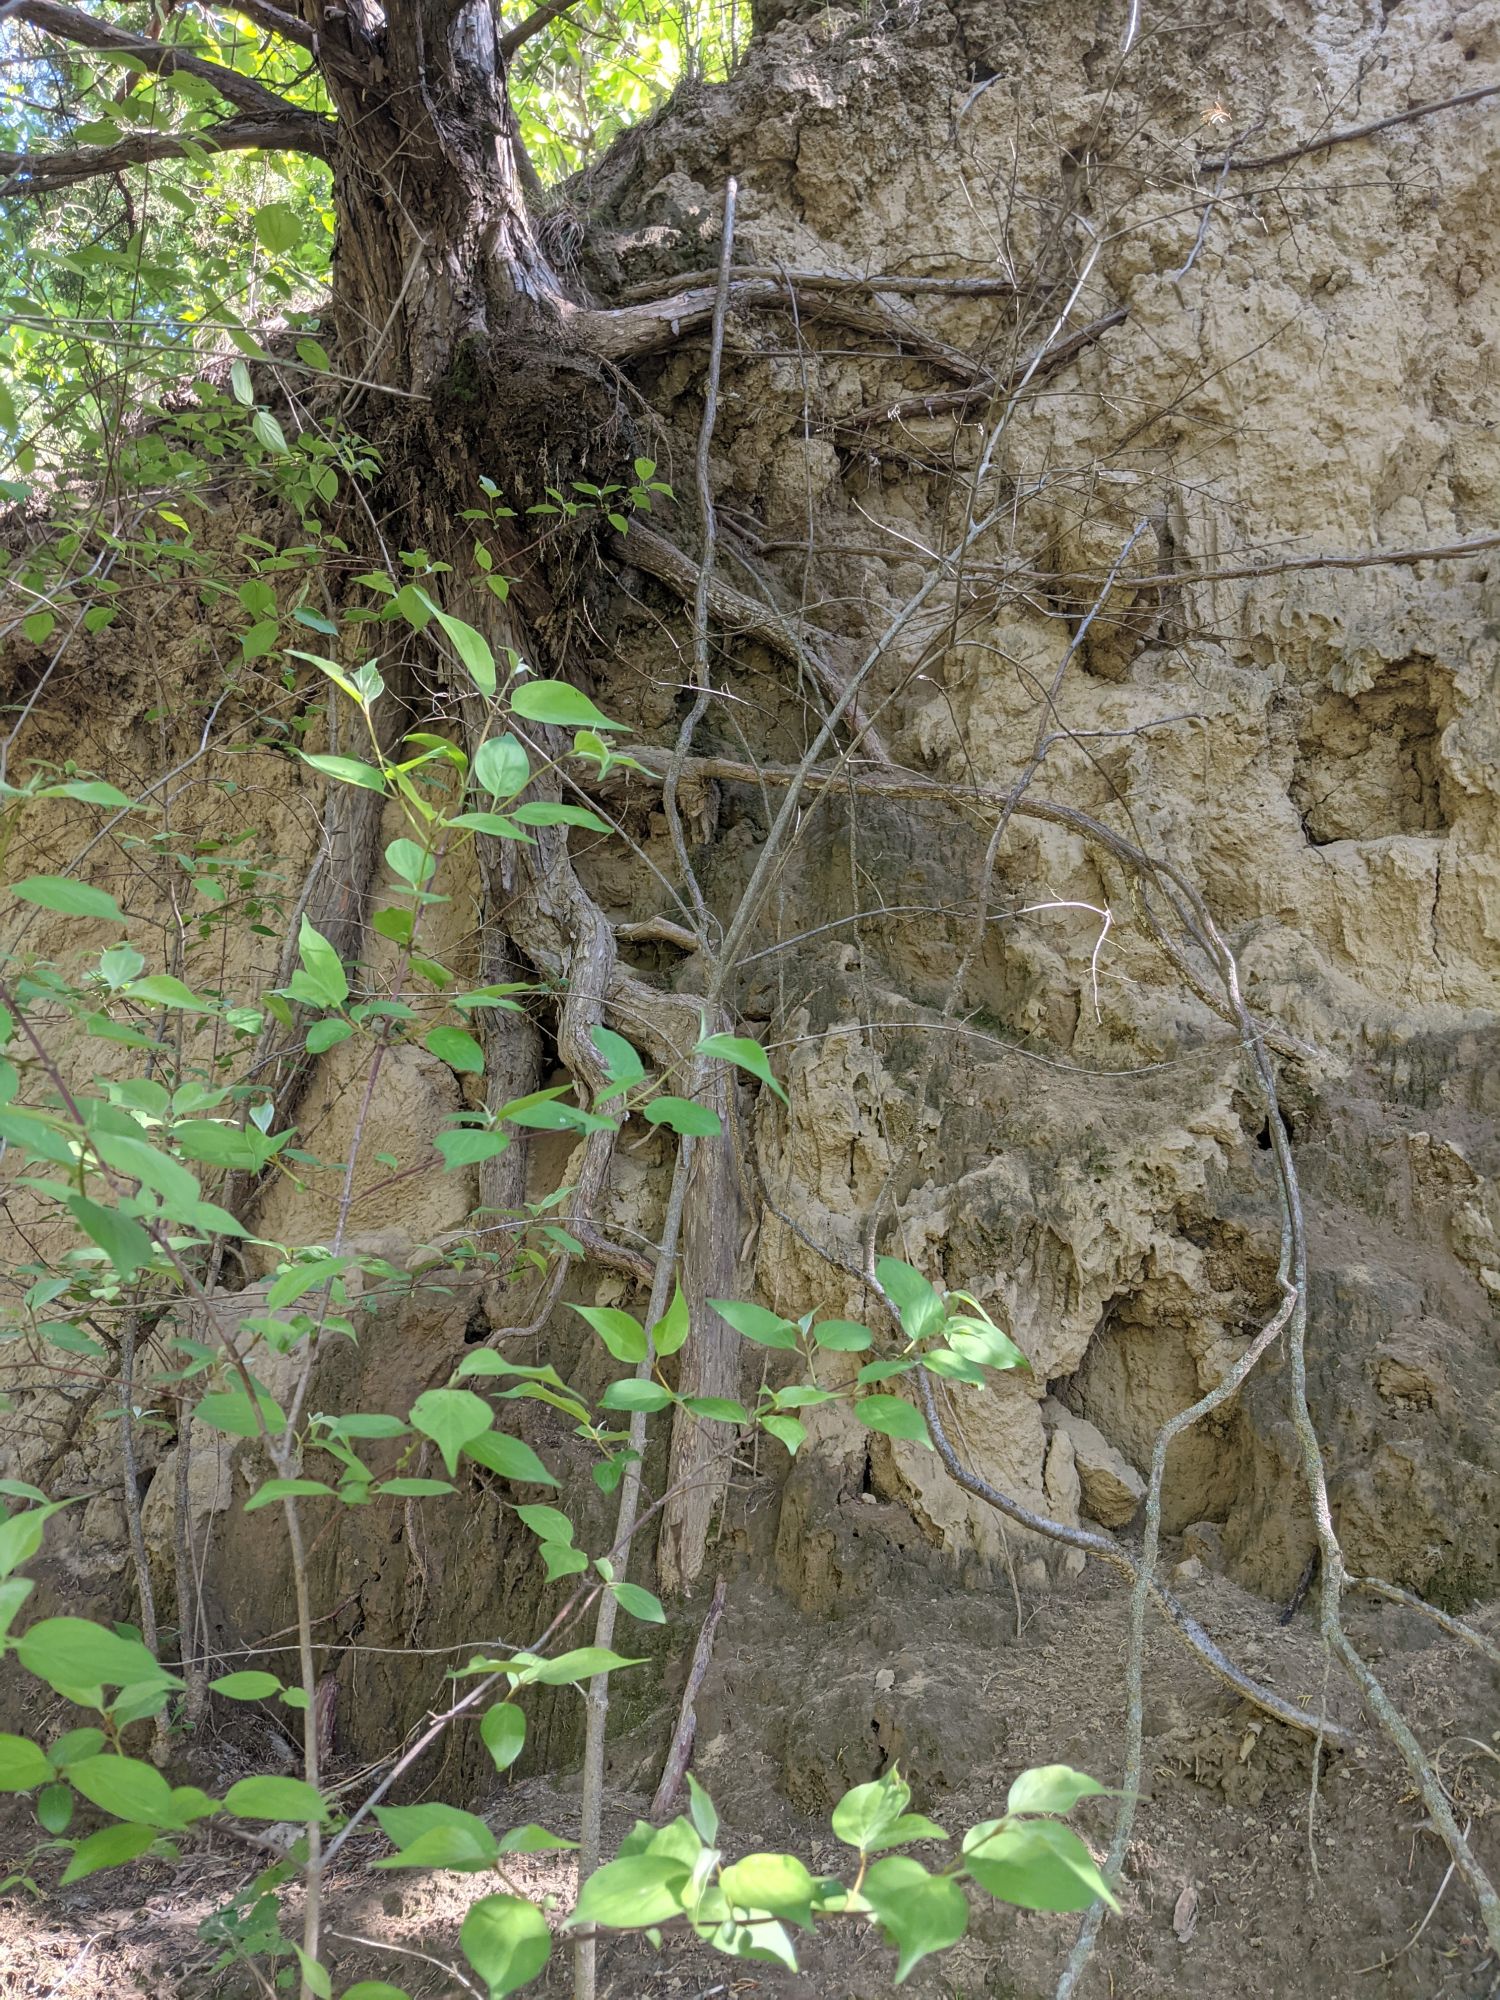 Tree and soil defying gravity in a steep cliff face at Western Iowa's Loess Hills.